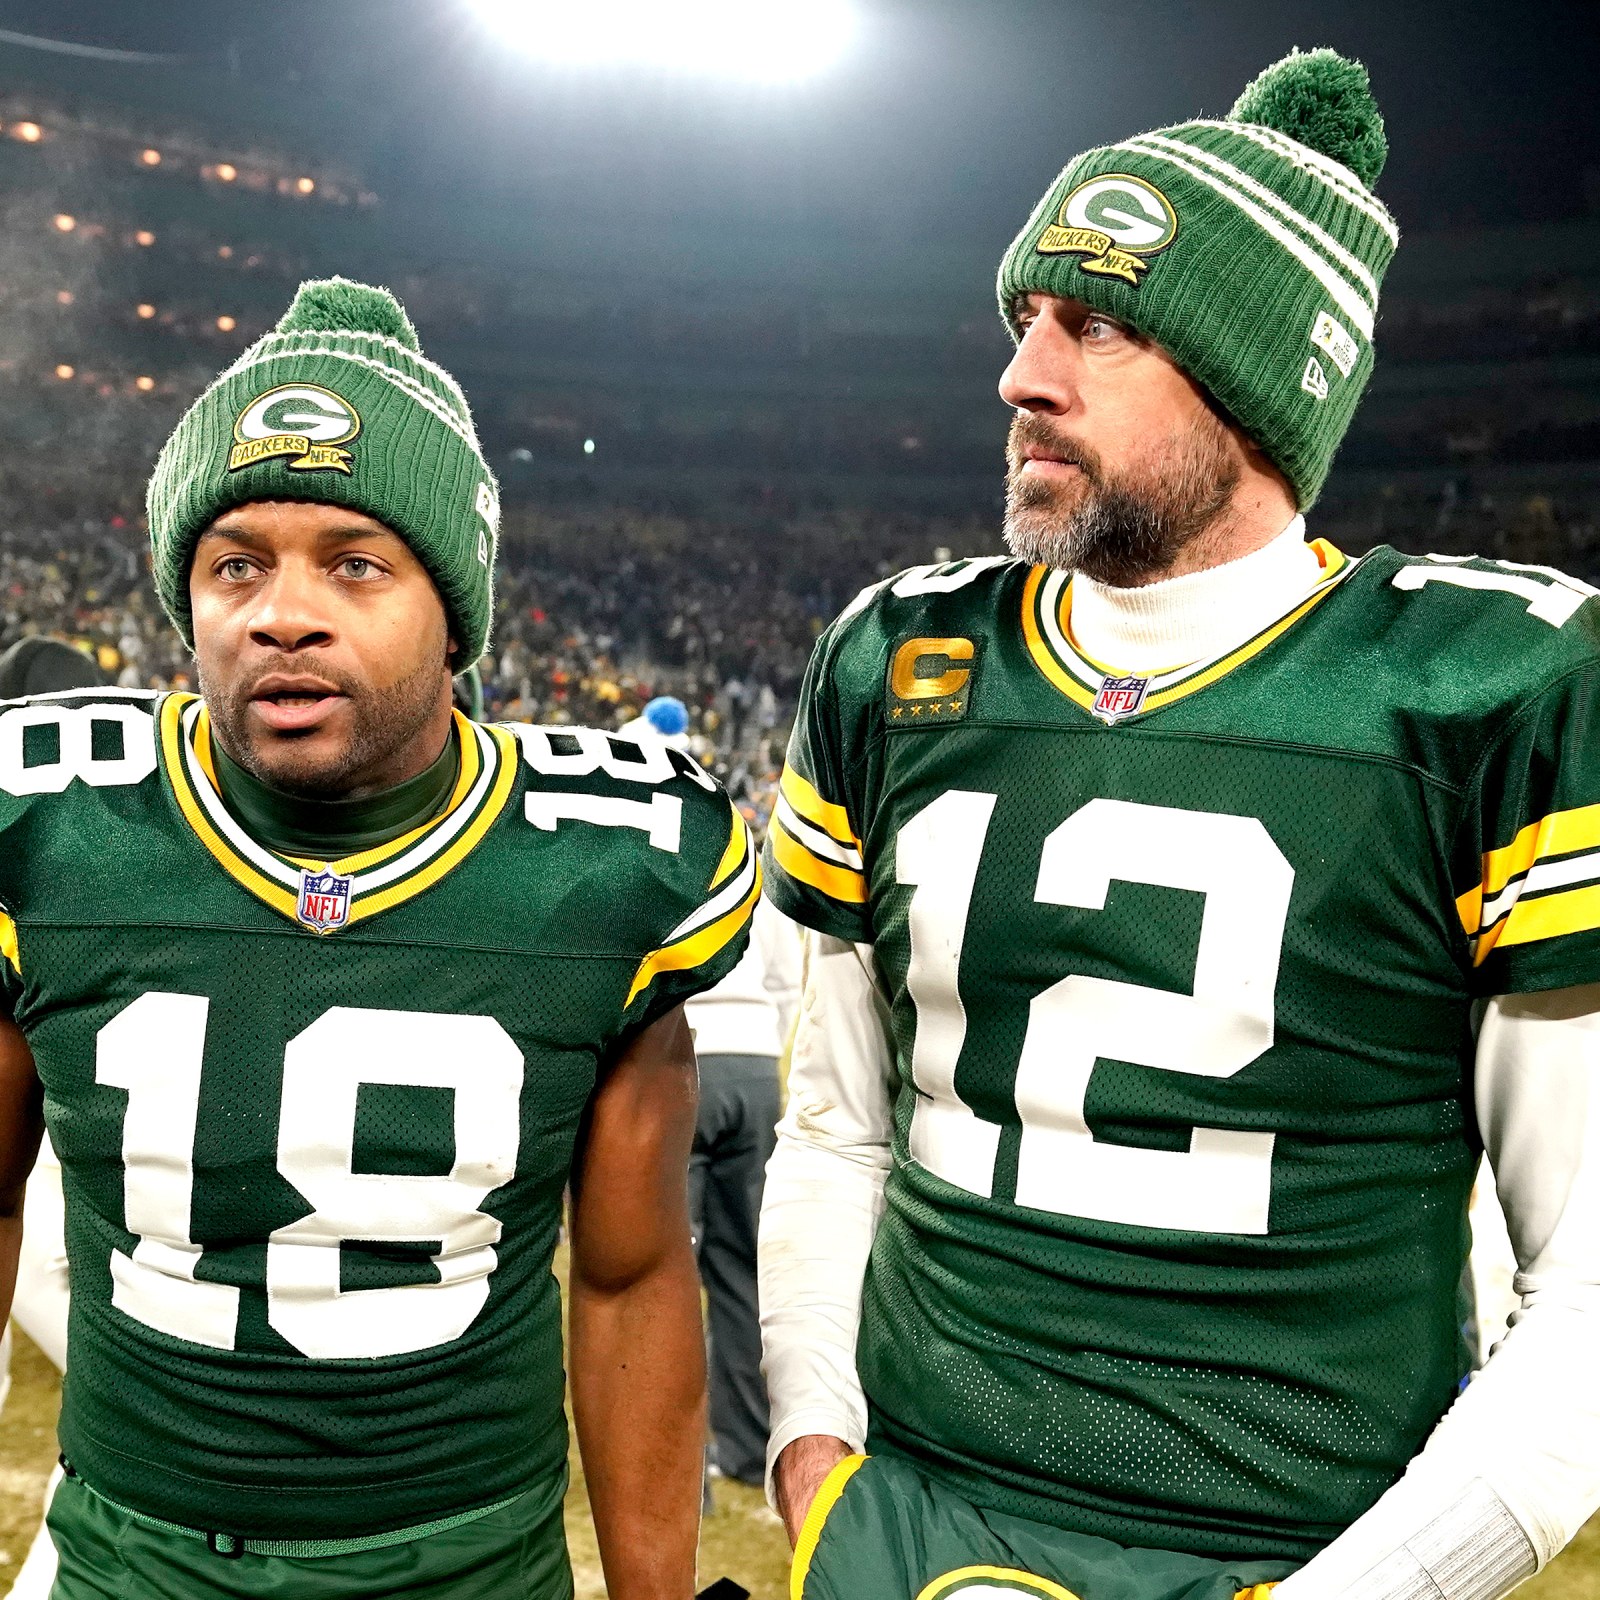 Hard Knocks' Clip Shows Aaron Rodgers' Reaction to Randall Cobb's Penalty